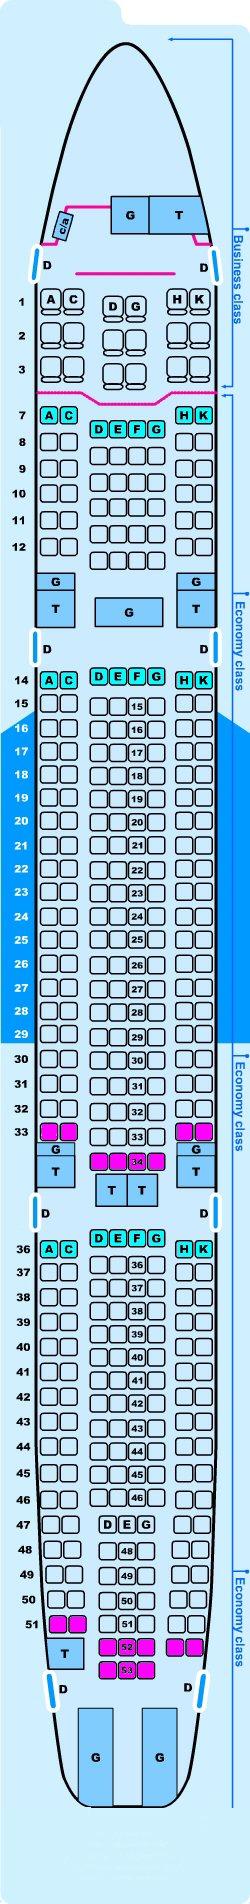 Seat Map Airbus A330 300 Finnair Best Seats In The Plane Porn Sex Picture